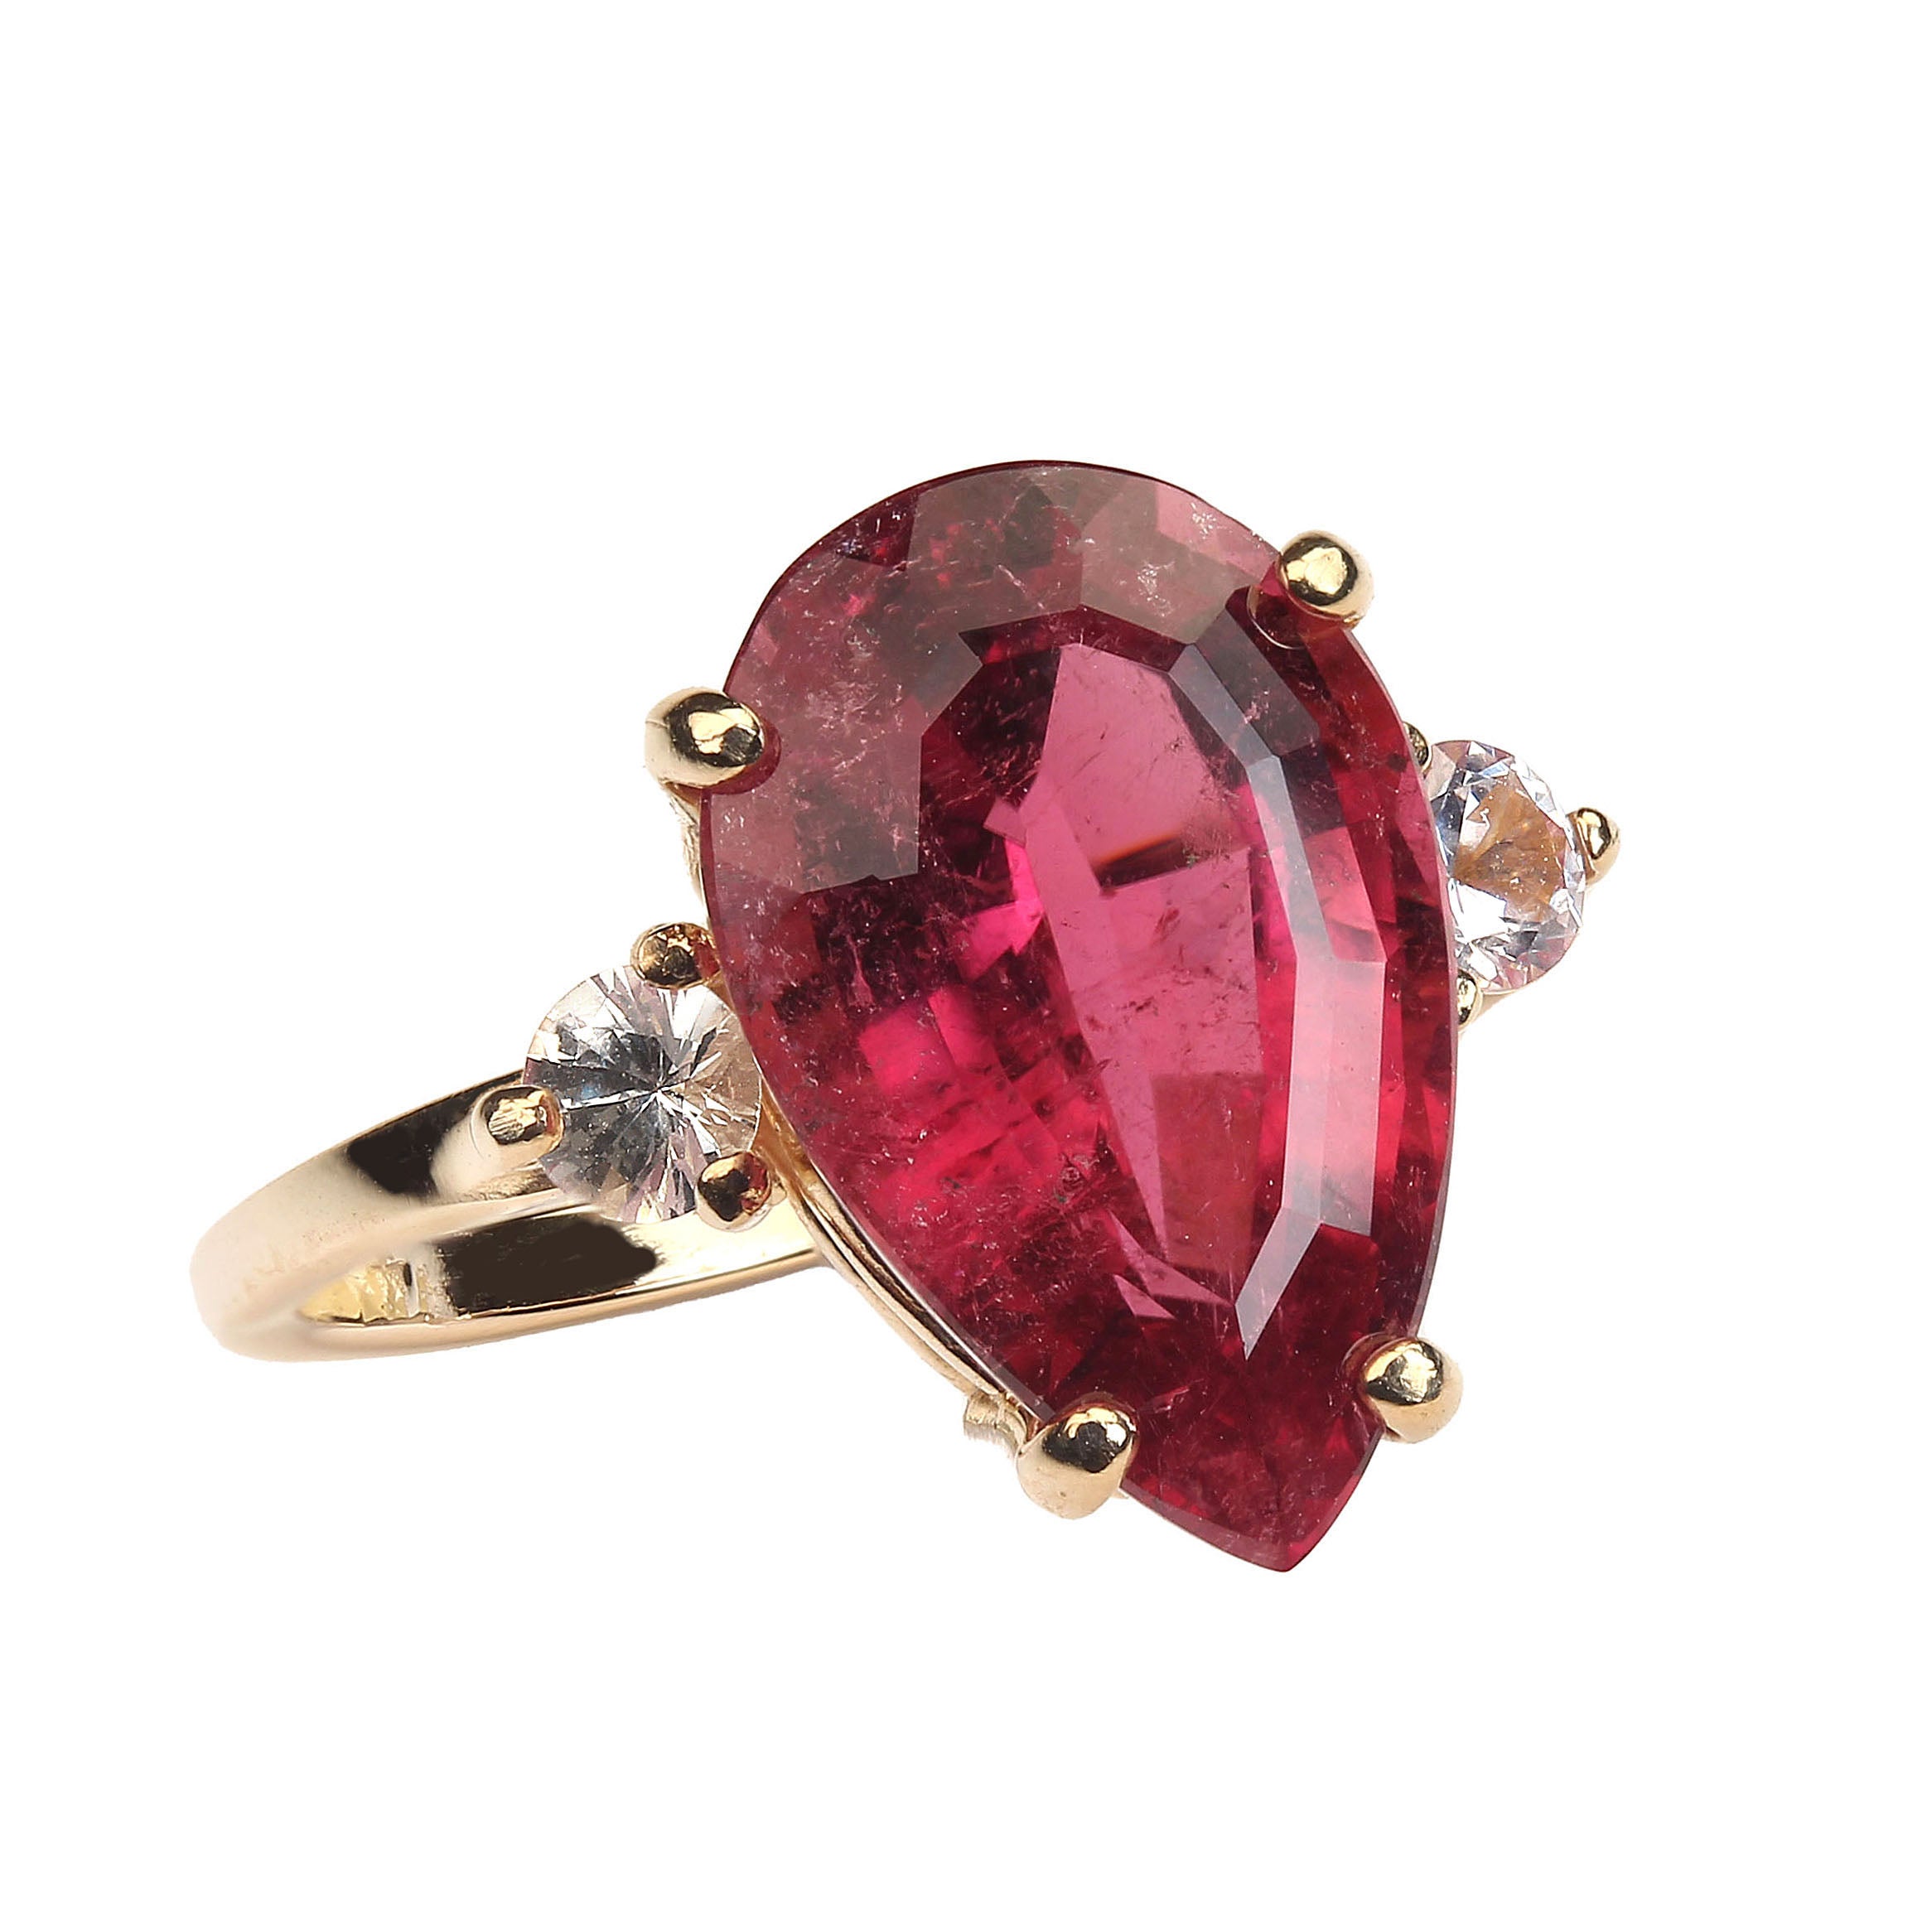 Sparkling, Brazilian Step cut Pear shape Rubelite accented with 2 White Sapphires set in rich 14K yellow gold.  The Rubelite is transparent but does have the typical rubelite inclusions which add to the sparkle. It is 4.5ct and is approx 14x9mm. 